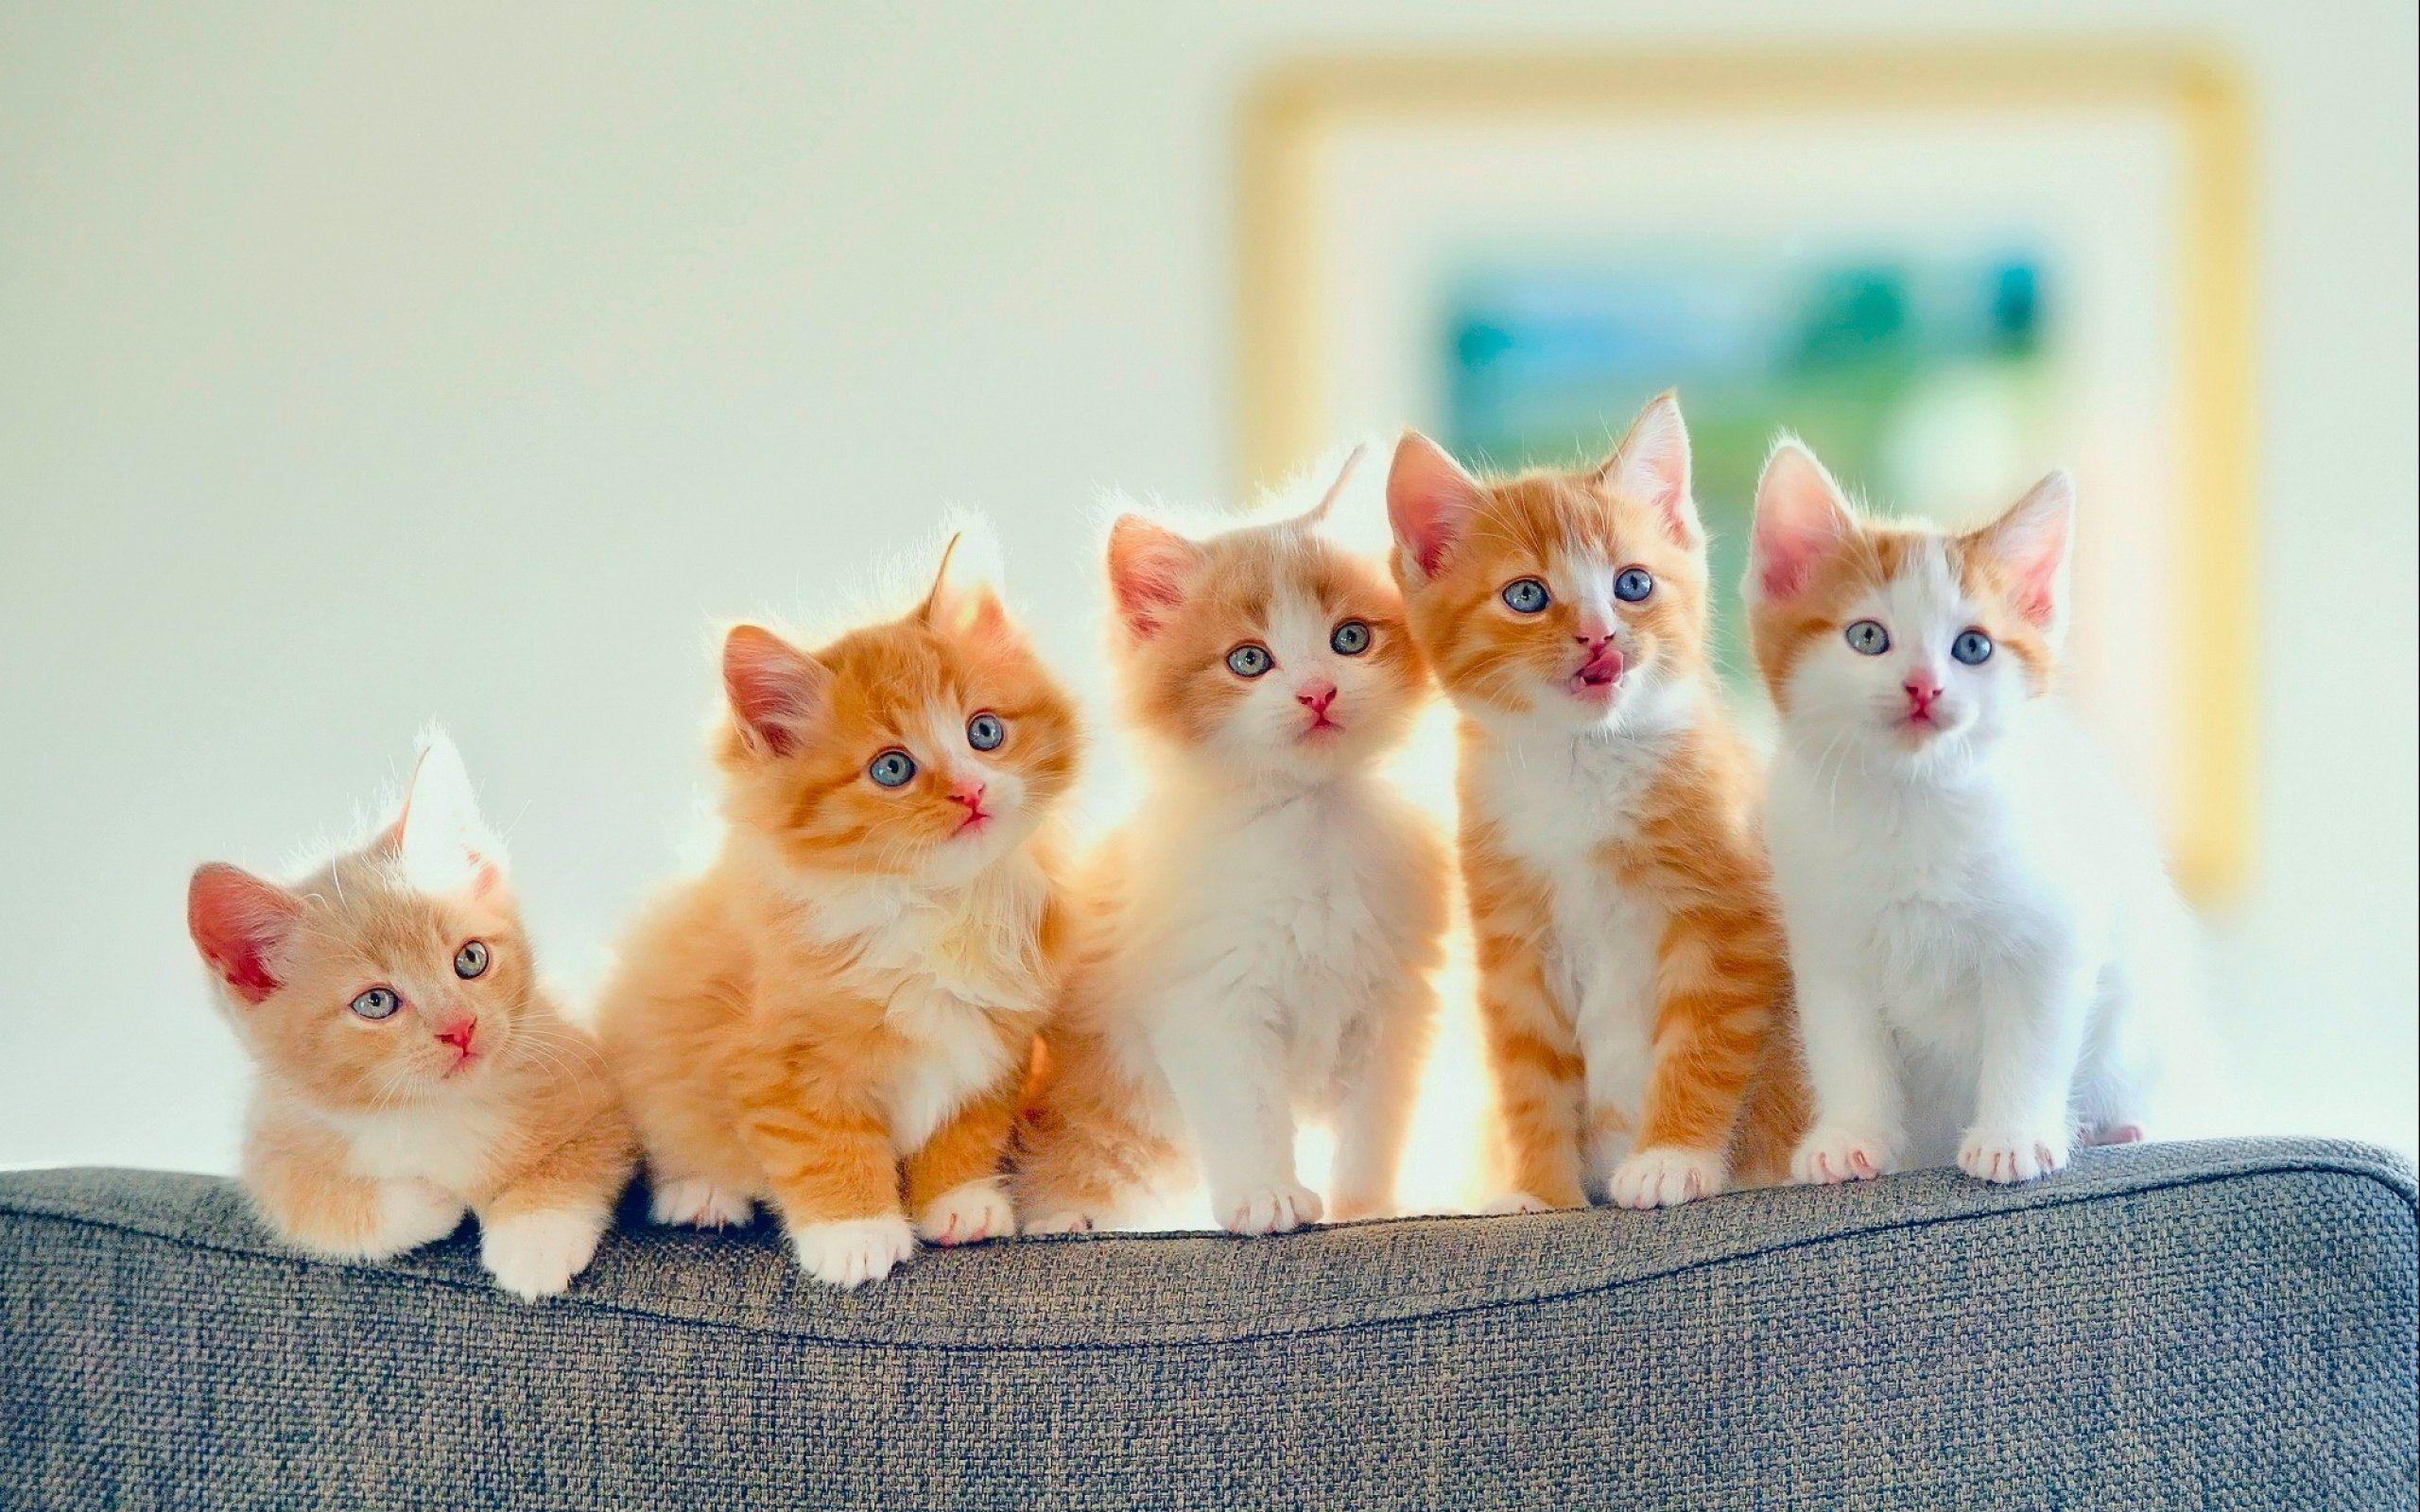 Cute Baby Cats Wallpaper 1080p with High Resolution Wallpaper